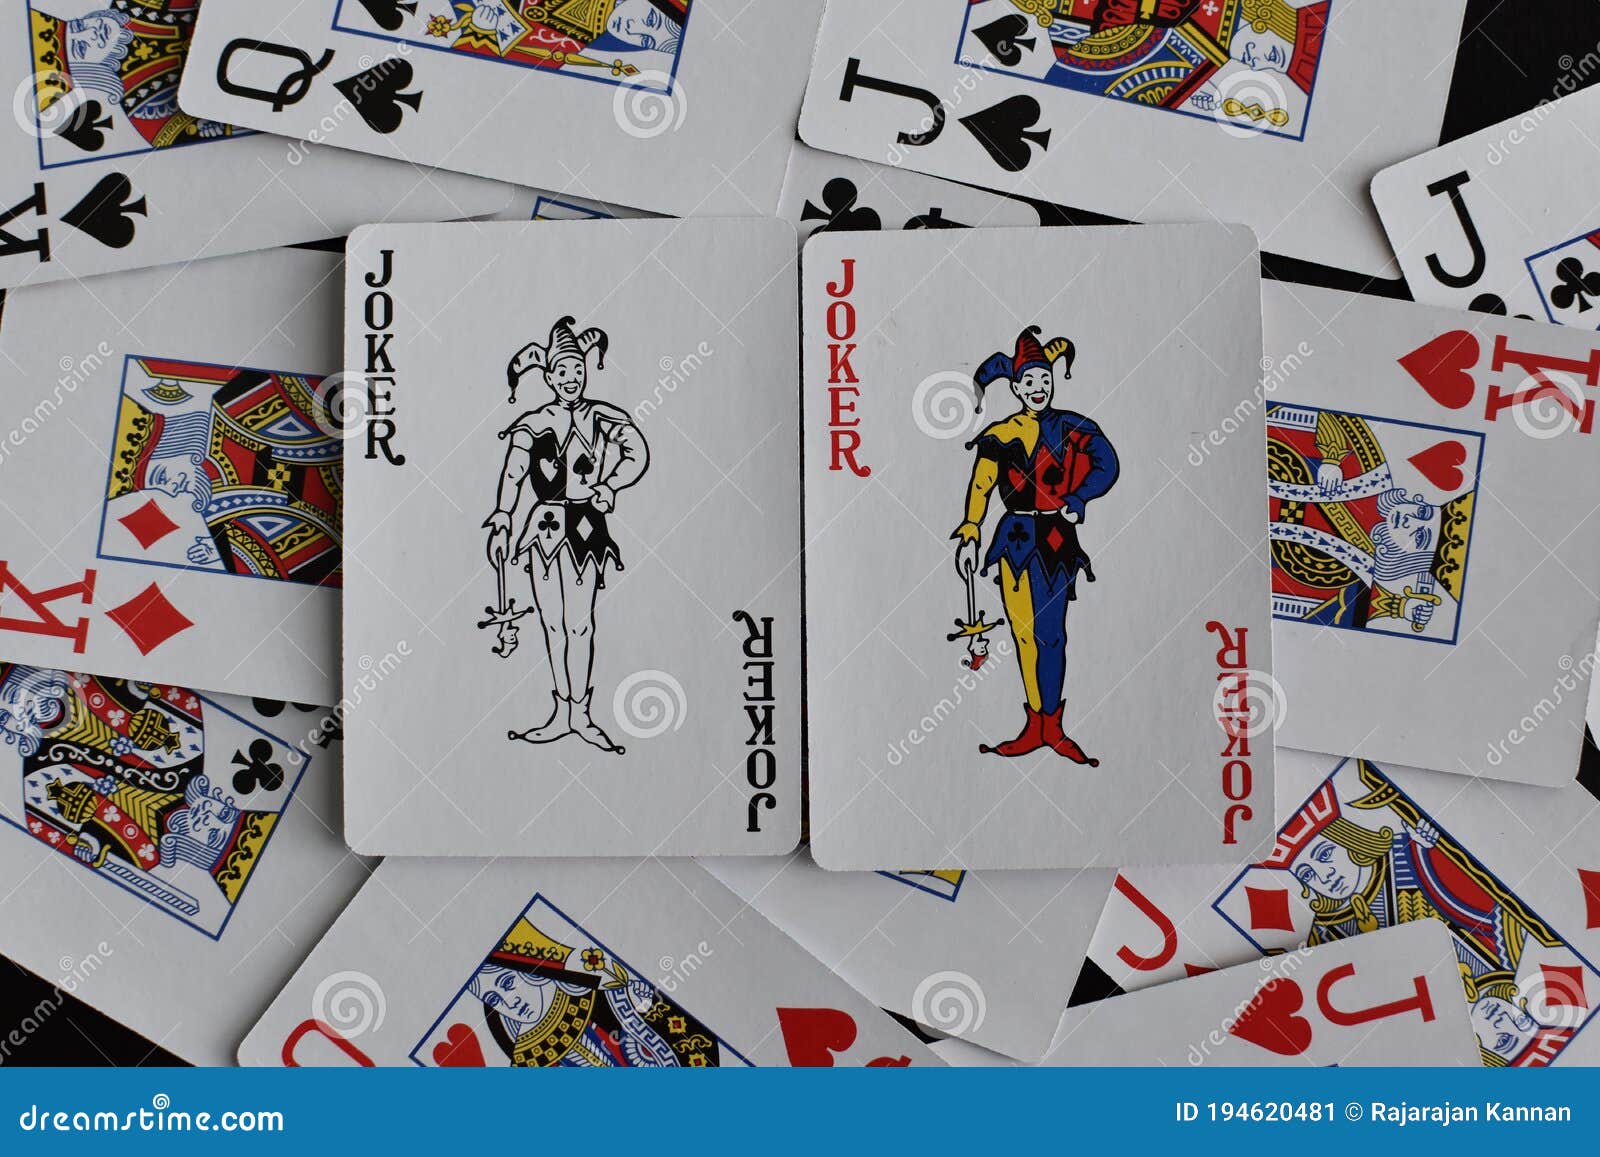 Playing Card Joker on the Background of Scattered Cards Stock Image - Image  of deck, cards: 194620481